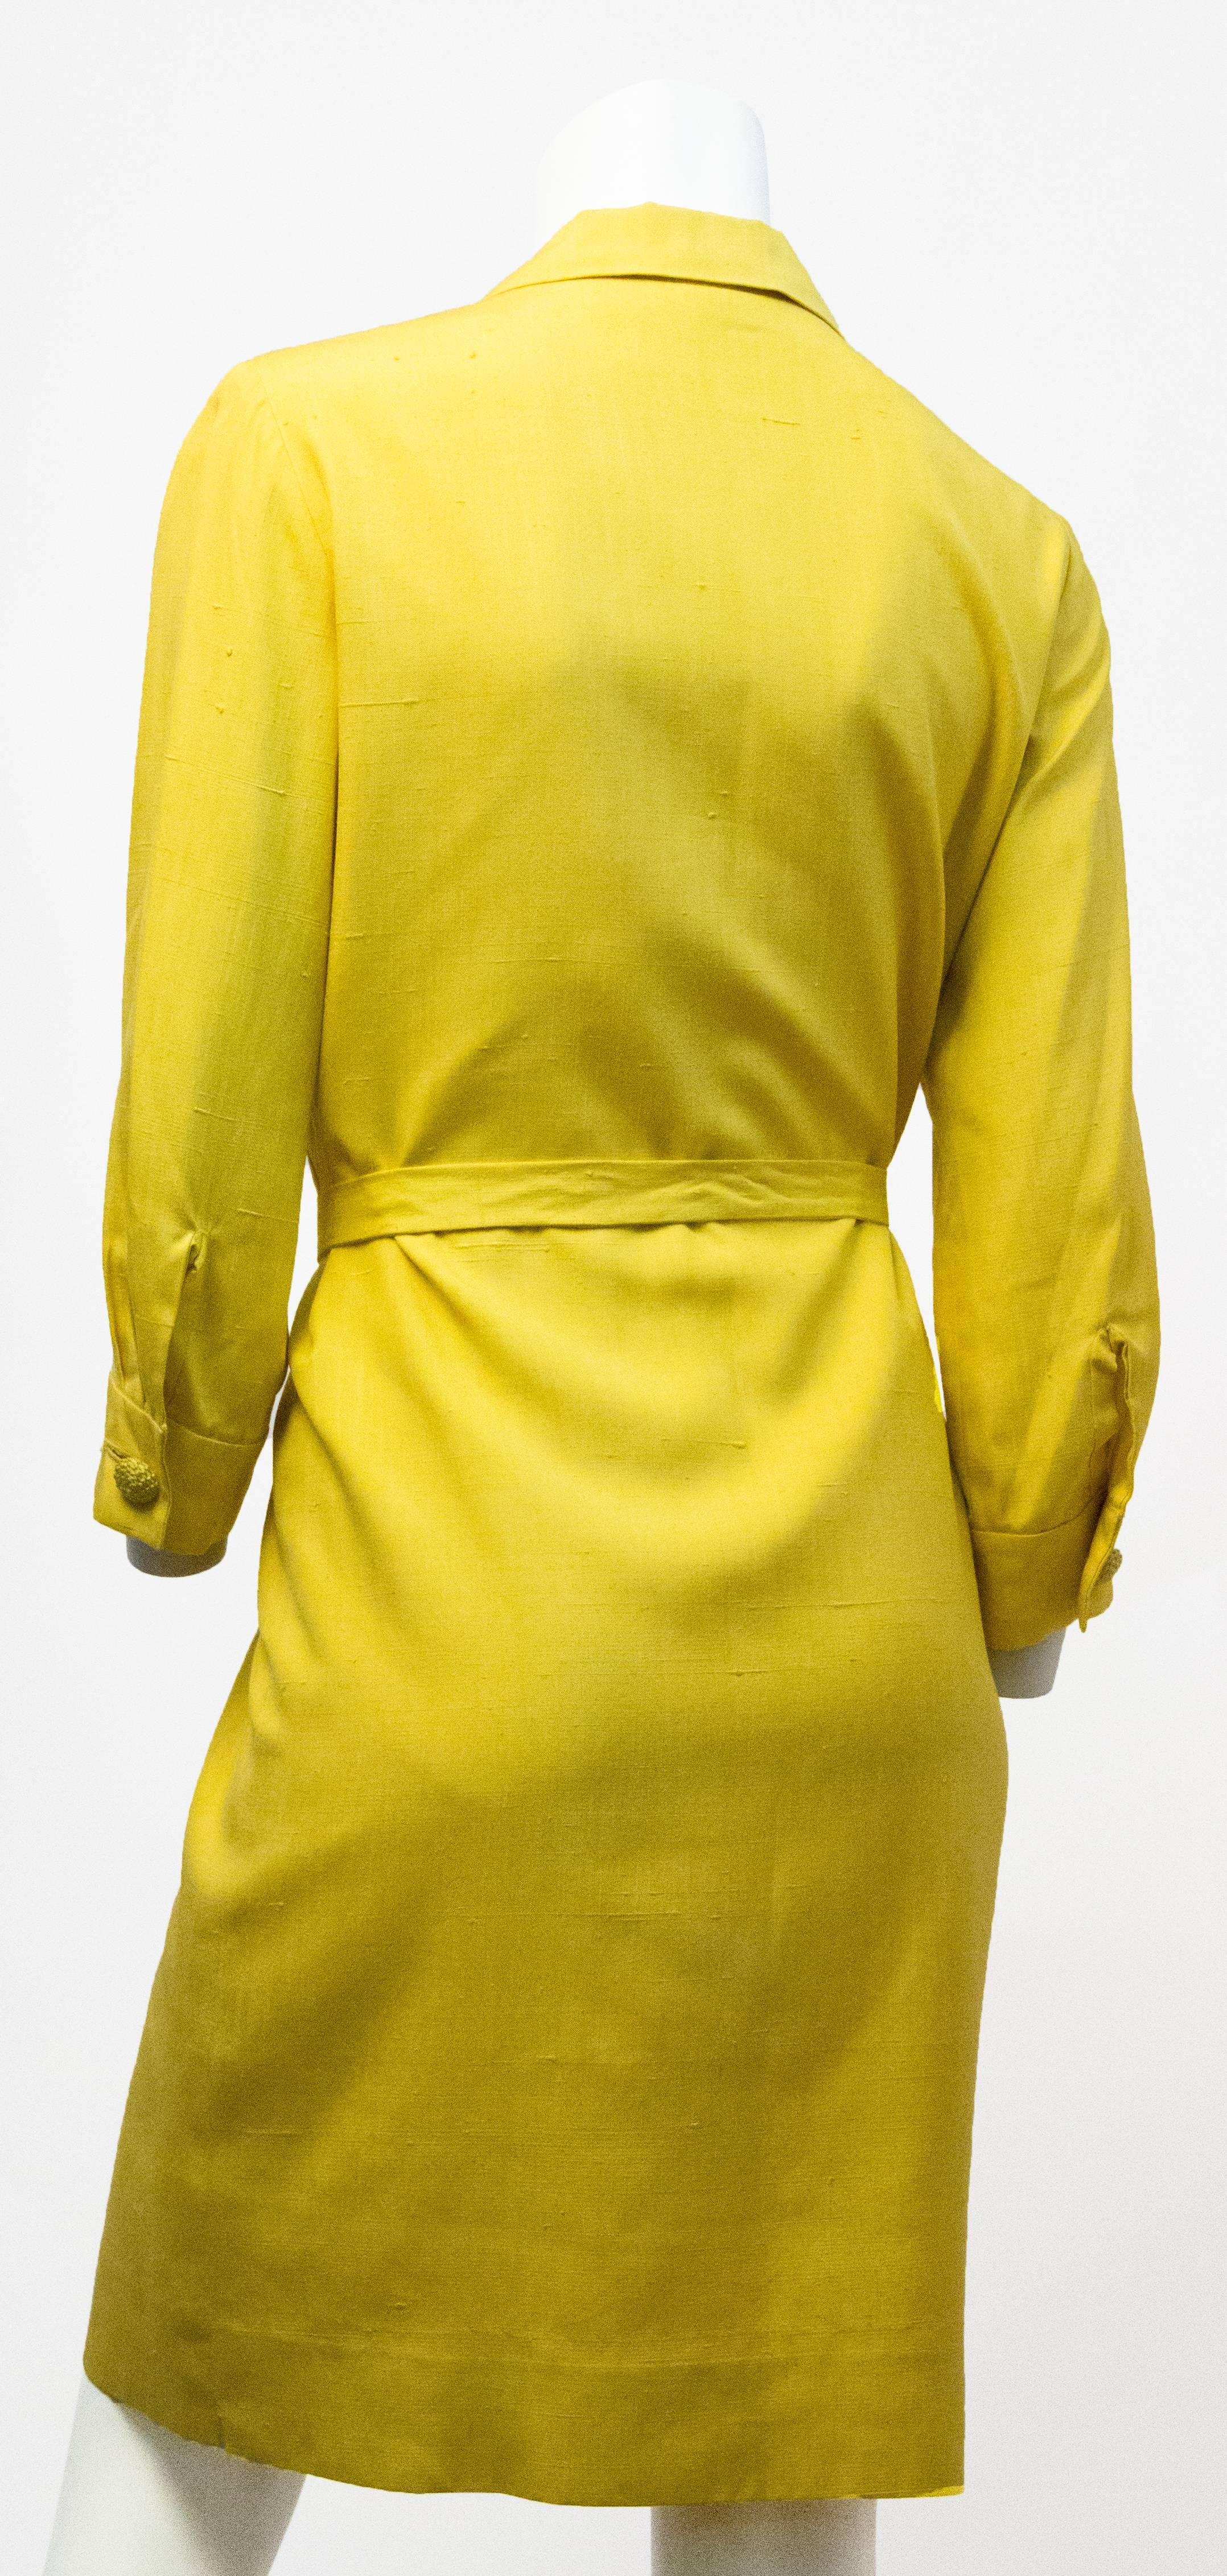 60s mod silk dress. Buttons up the front, and on sleeves. Original waist tie included. Fully lined. 